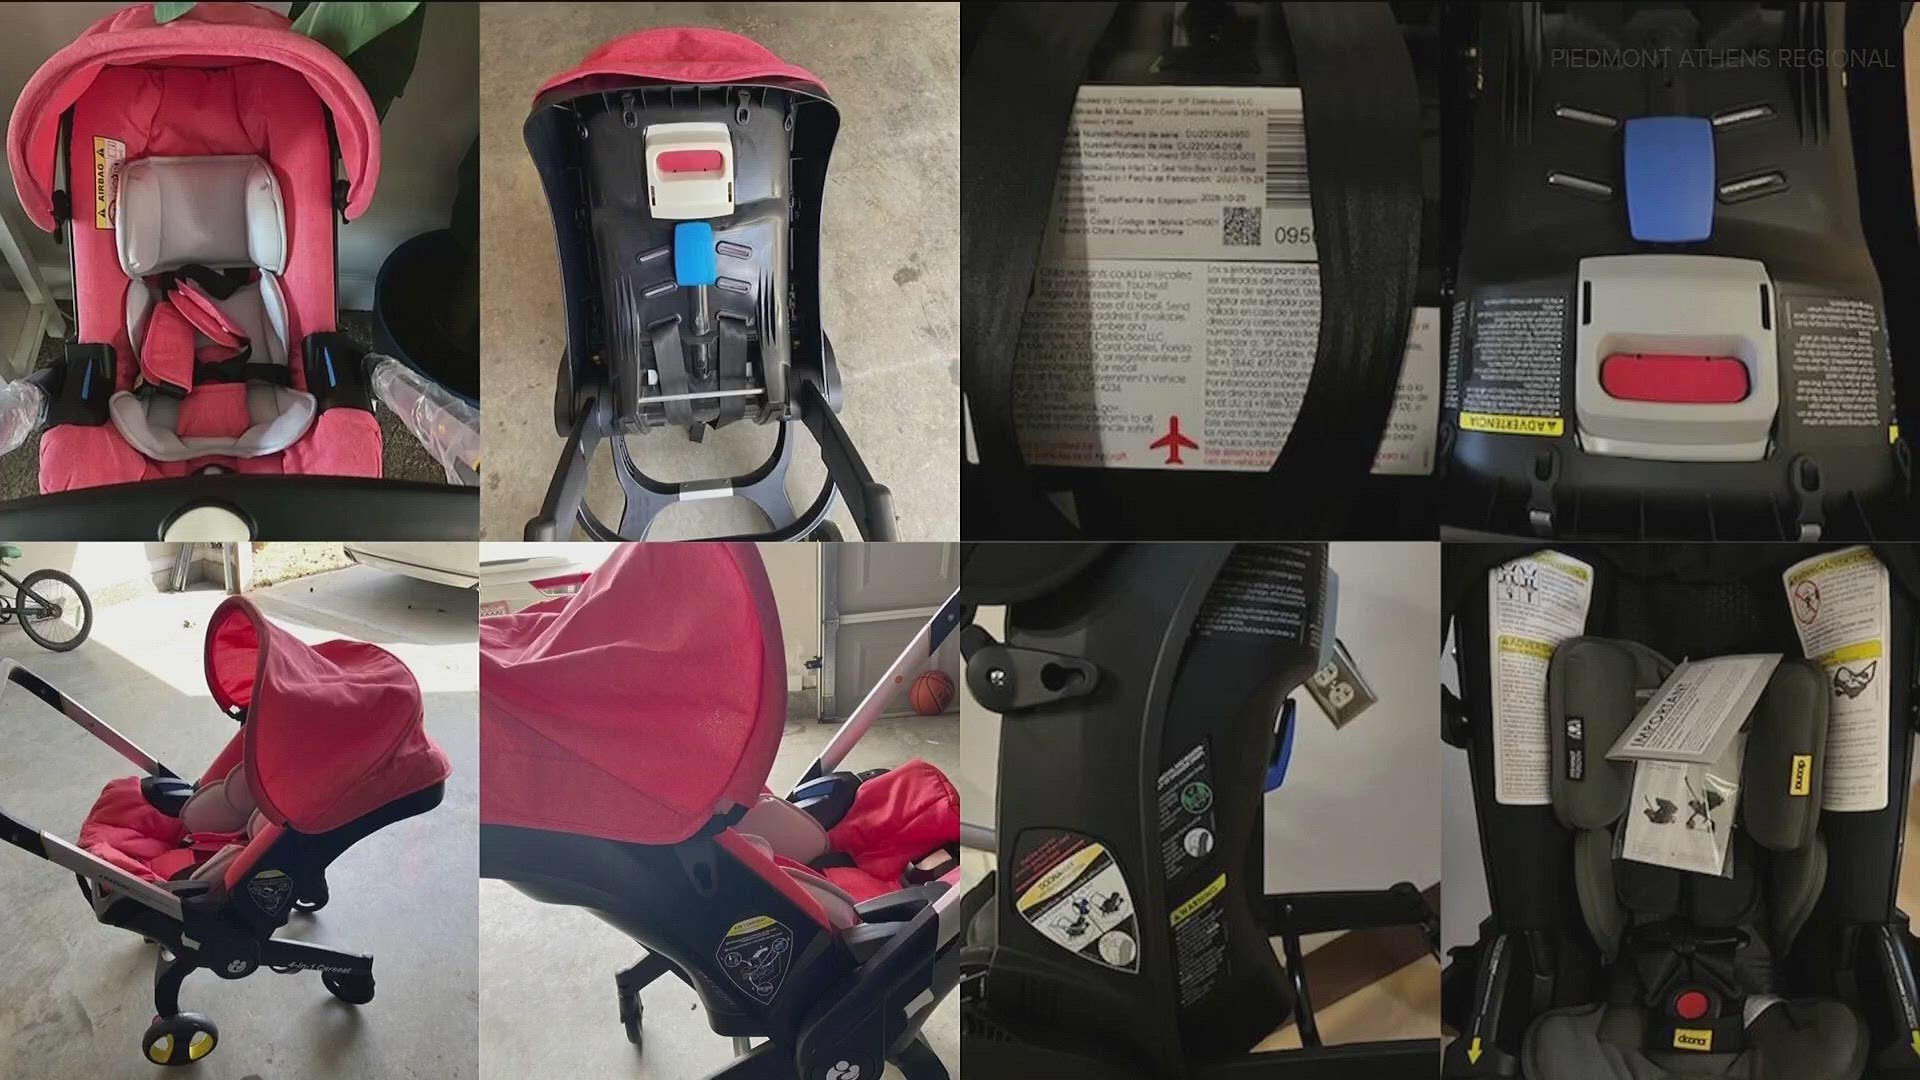 Safety experts are warning families to stay vigilant after nurses spotted a counterfeit car seat in a local hospital.